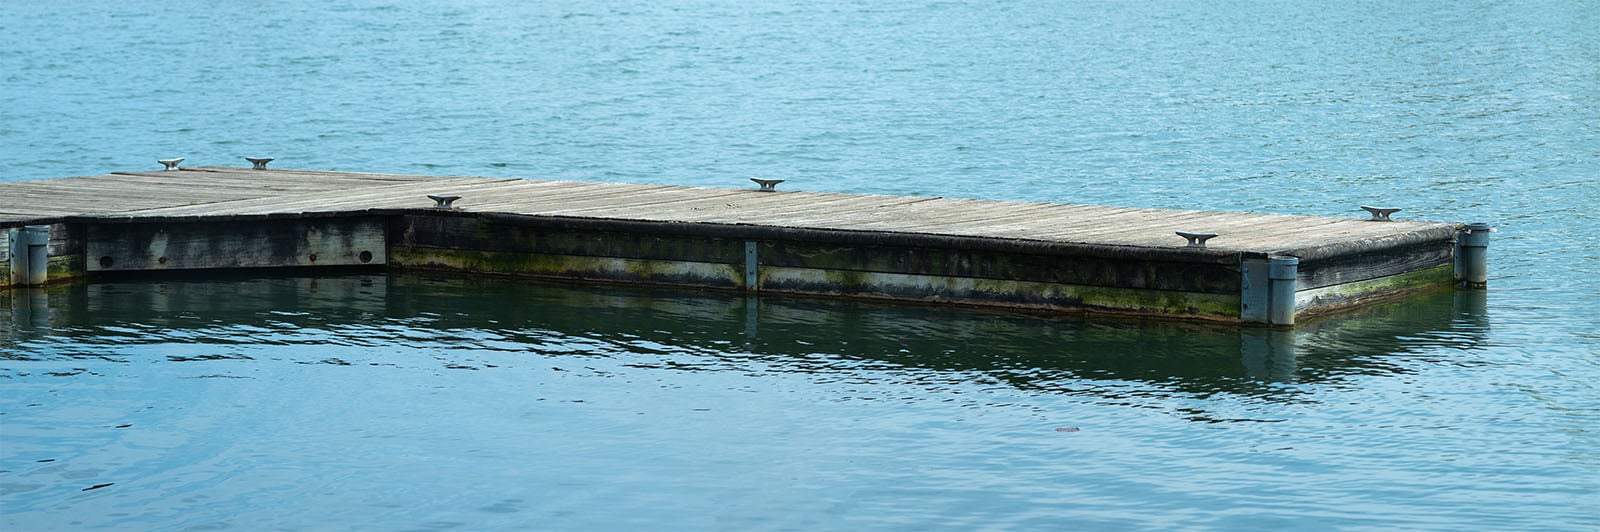 A wooden pier with metal cleats floats on calm blue water, showing signs of weathering and algae accumulation along its submerged edges.